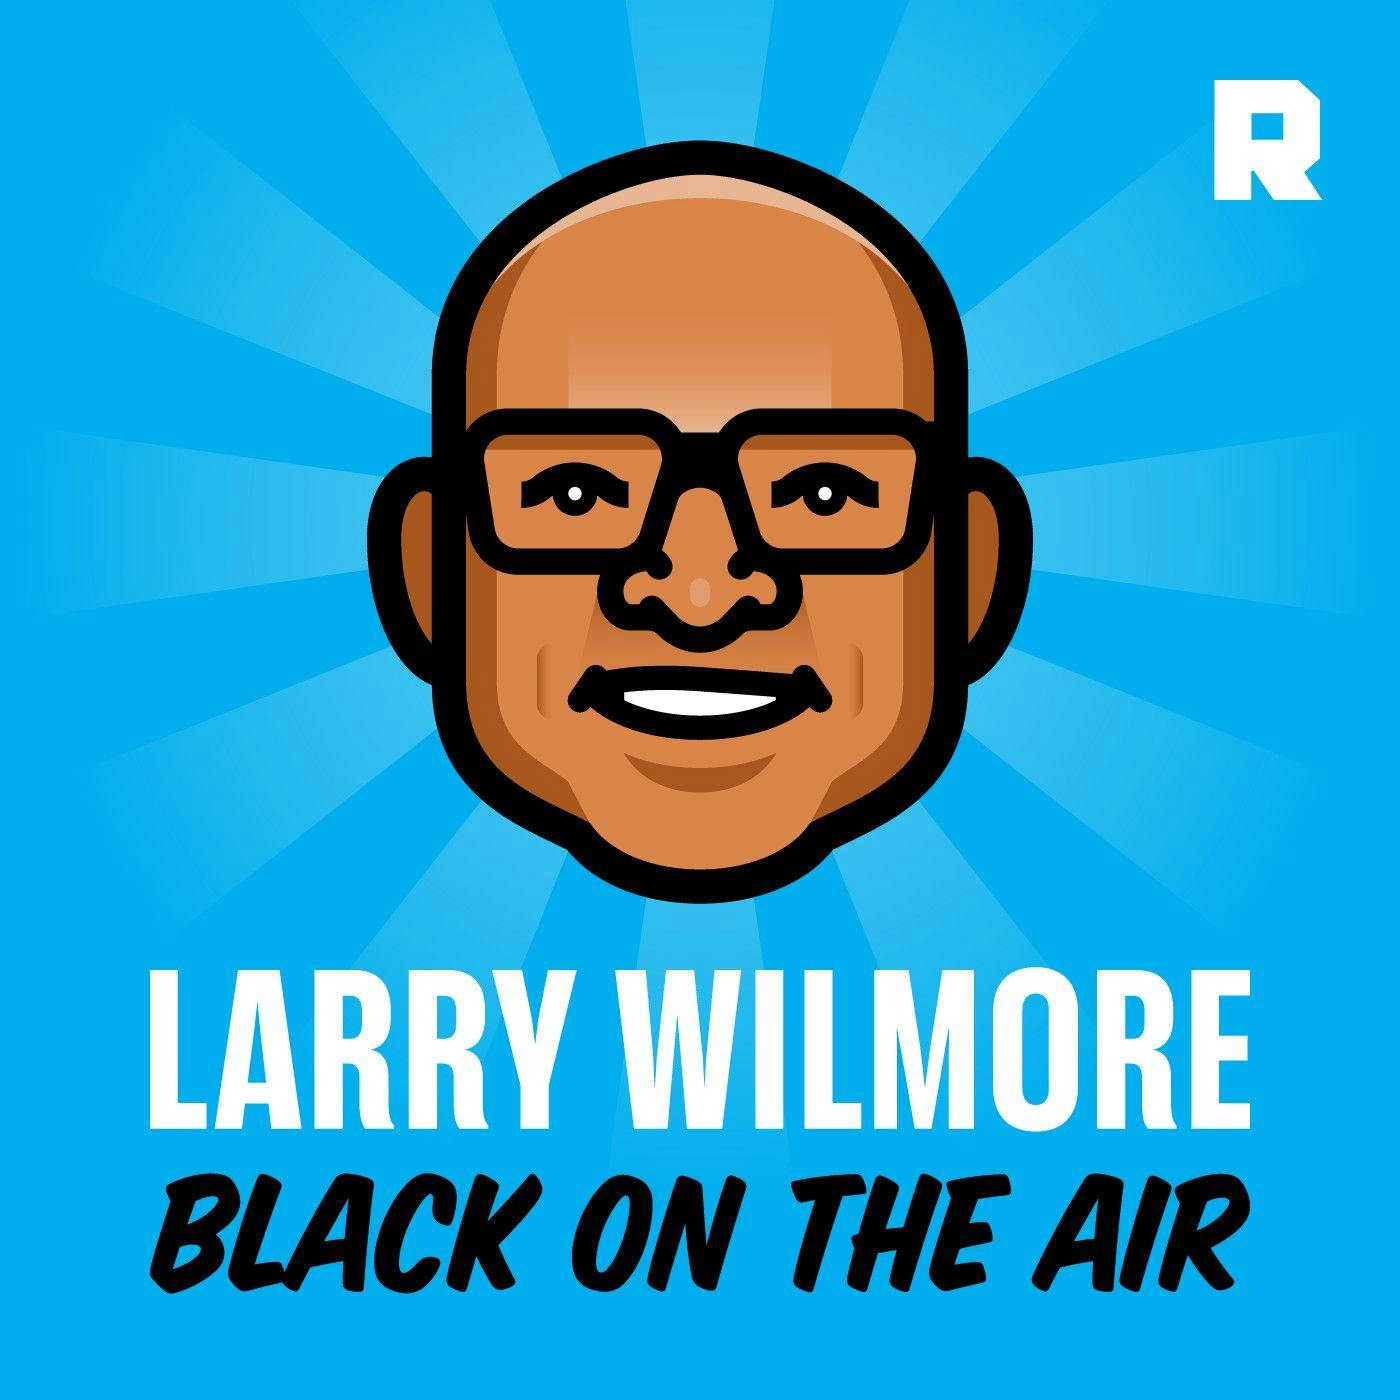 Tracee Ellis Ross Wants to Show Up for Something Bigger Than Herself | Larry Wilmore: Black on the Air (Ep. 55)